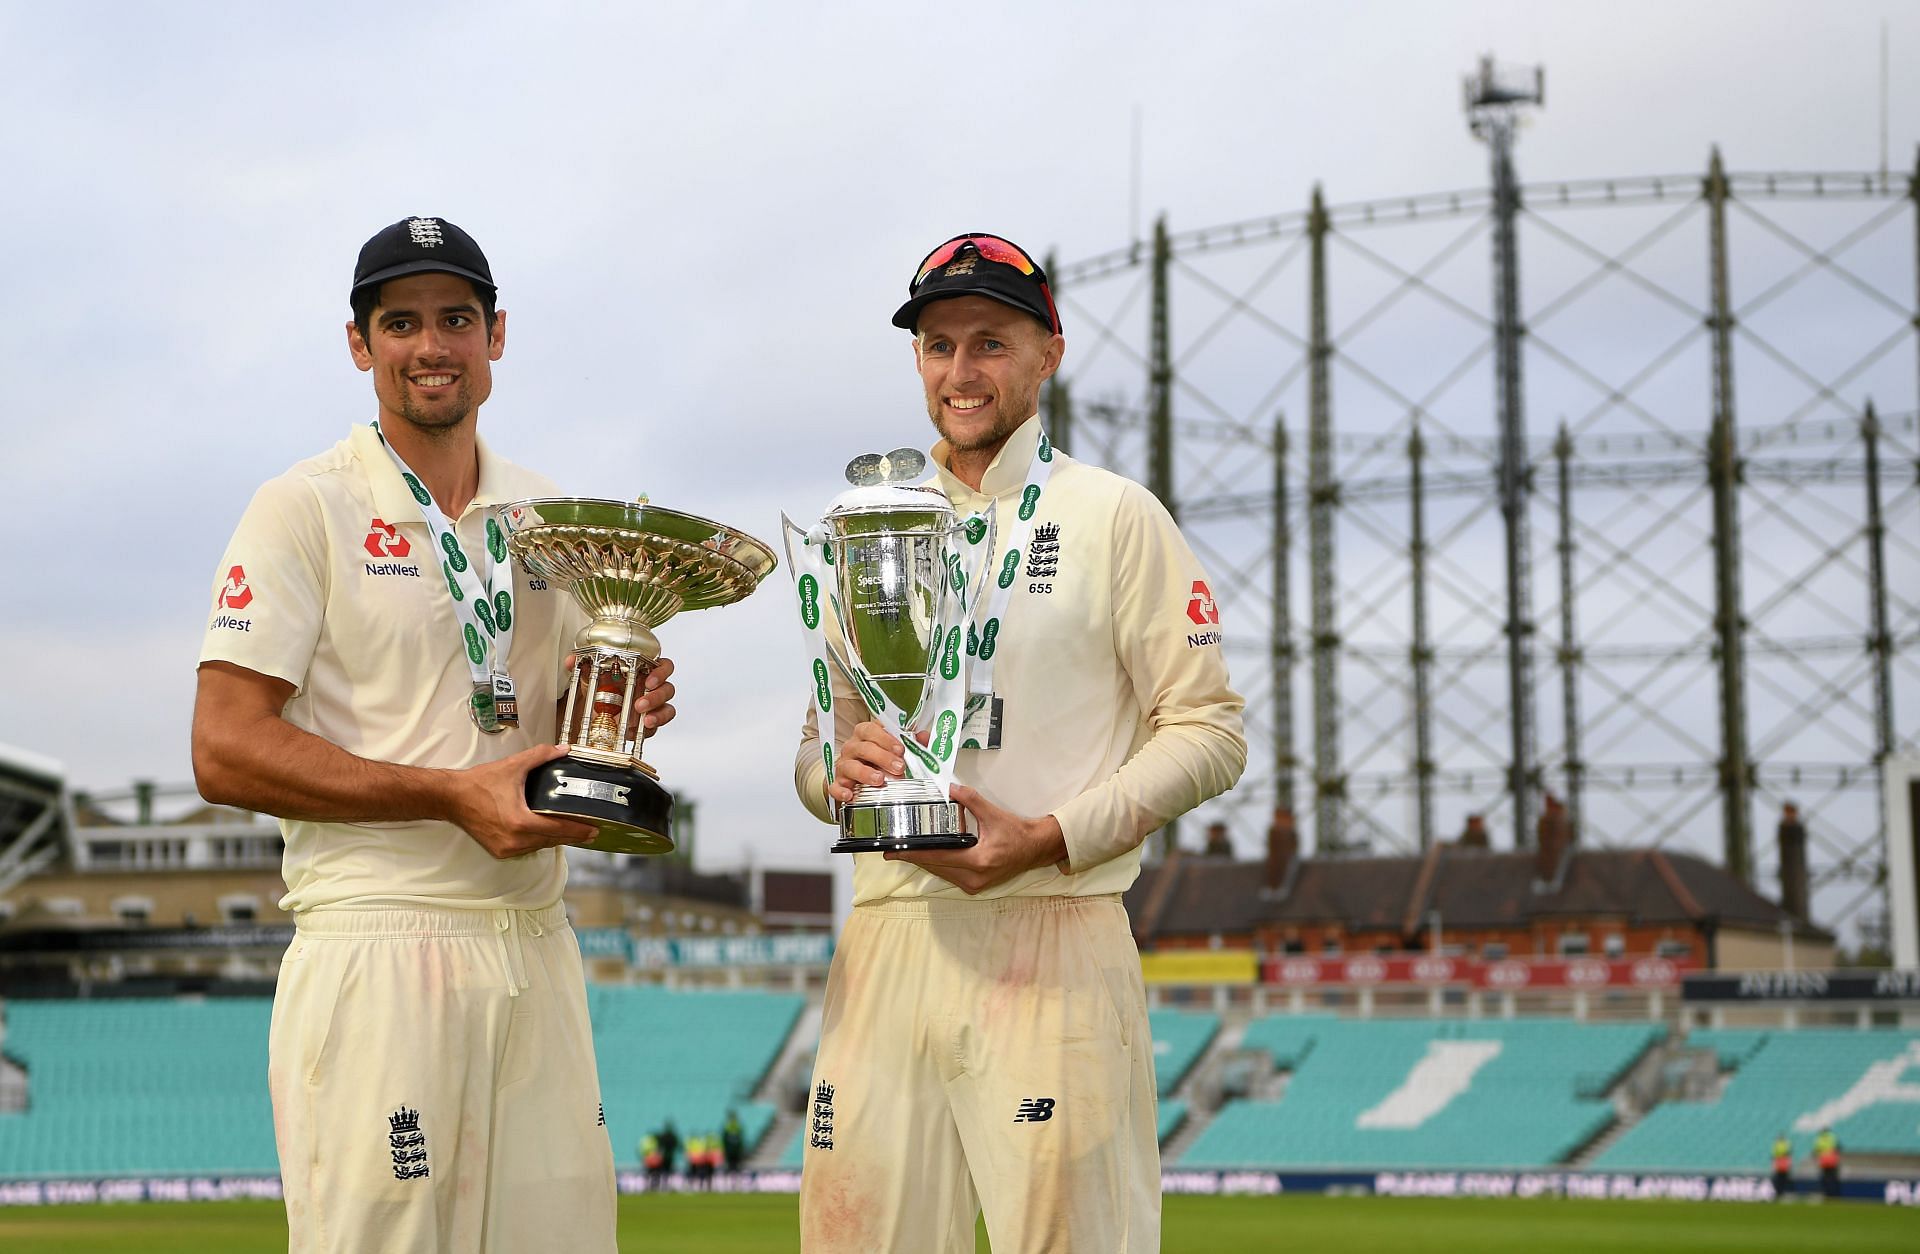 Root made his Test debut under Alastair Cook in 2012 (Credit: Getty Images)